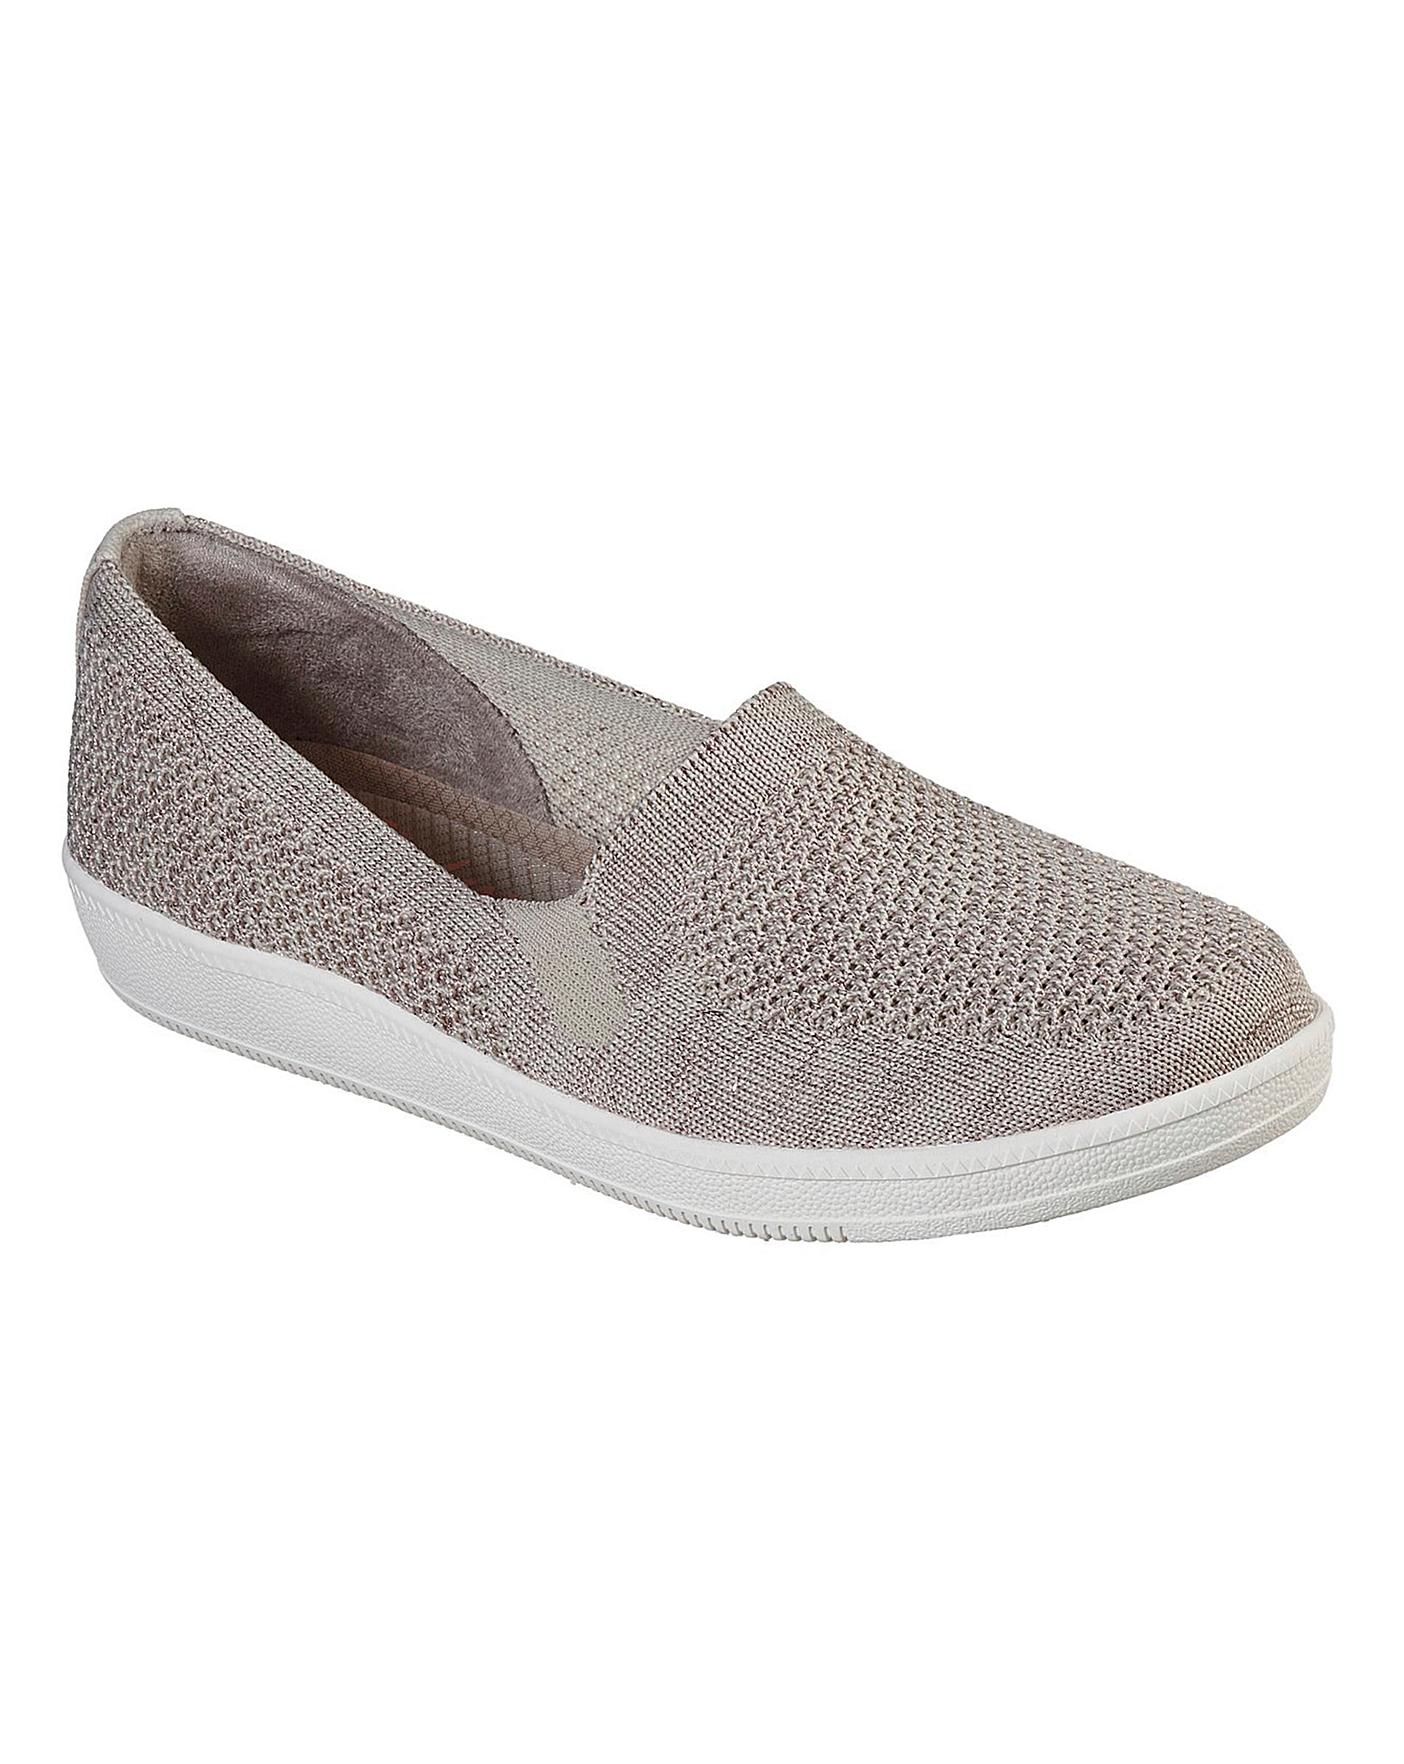 Skechers Slip on Leisure Shoes D Fit | Crazy Clearance